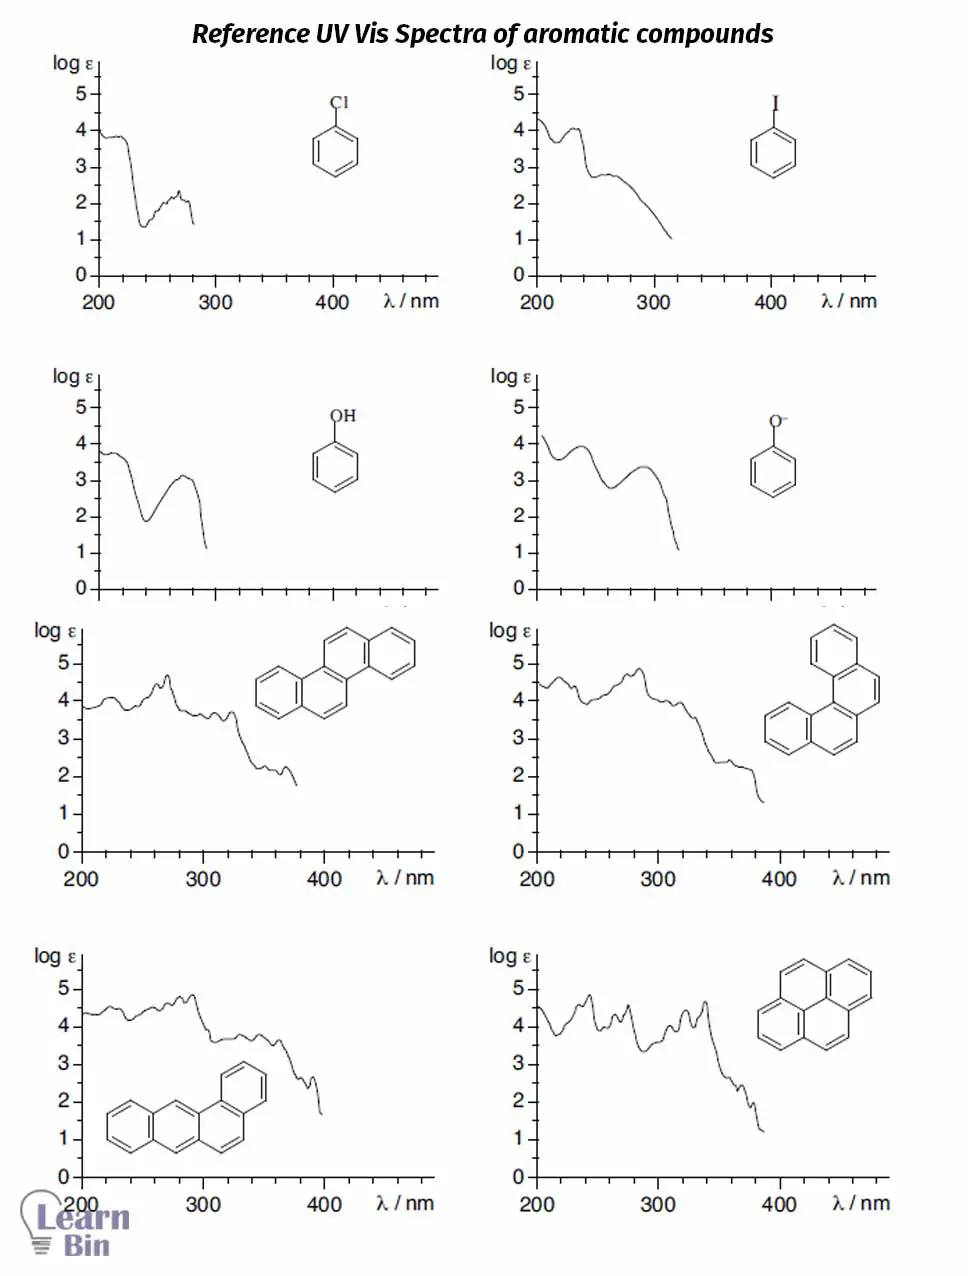 Reference UV Vis Spectra of aromatic compounds